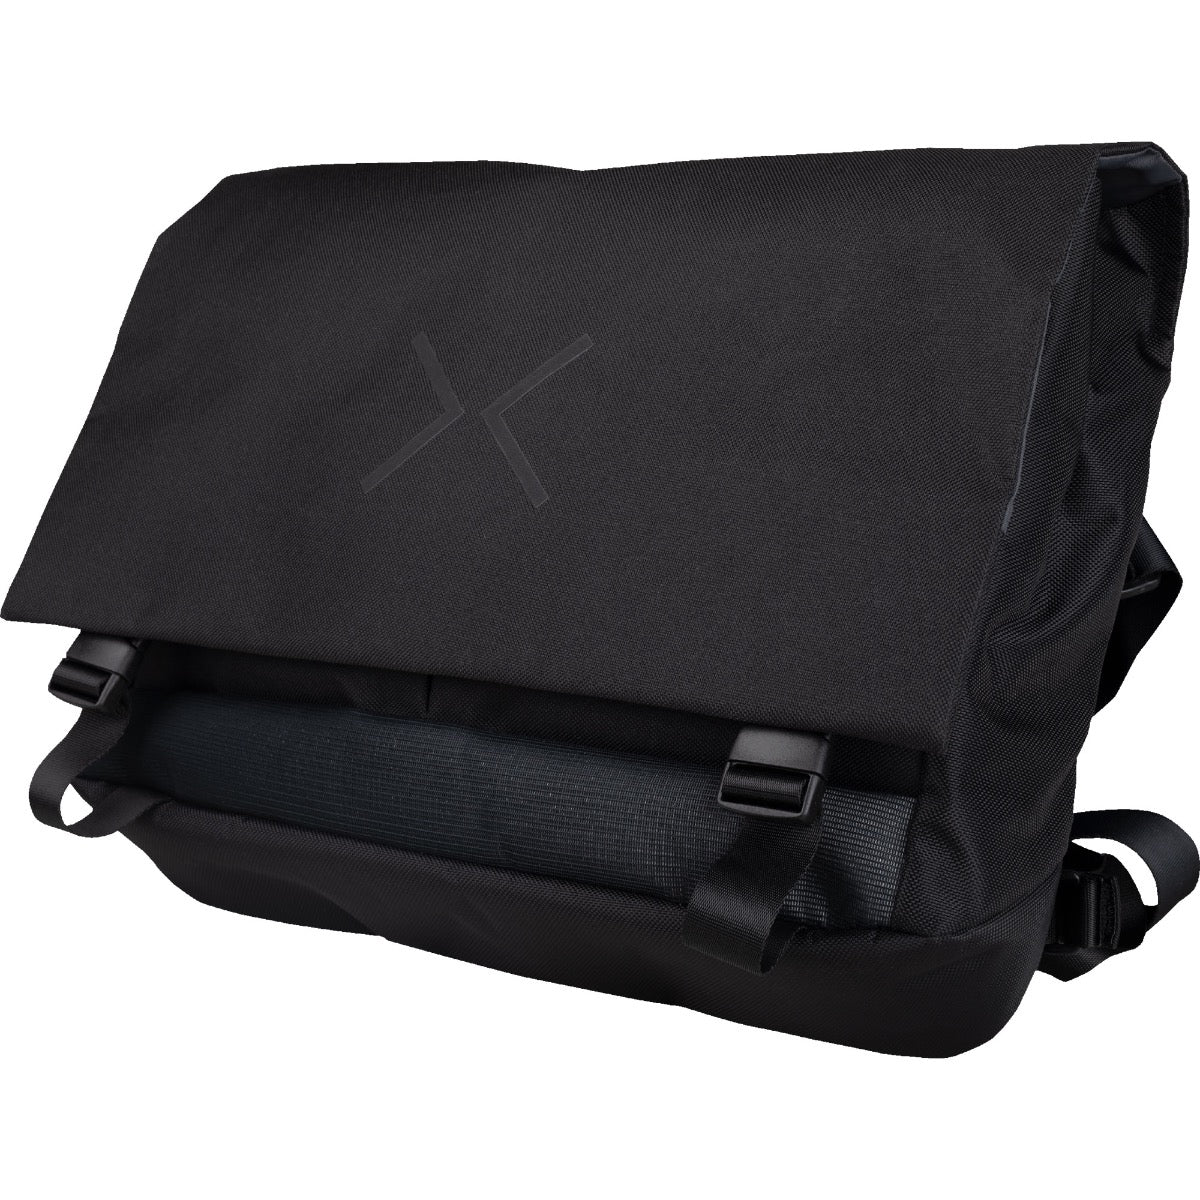 Perspective view of closed Line 6 HX Messenger Bag showing front and right side